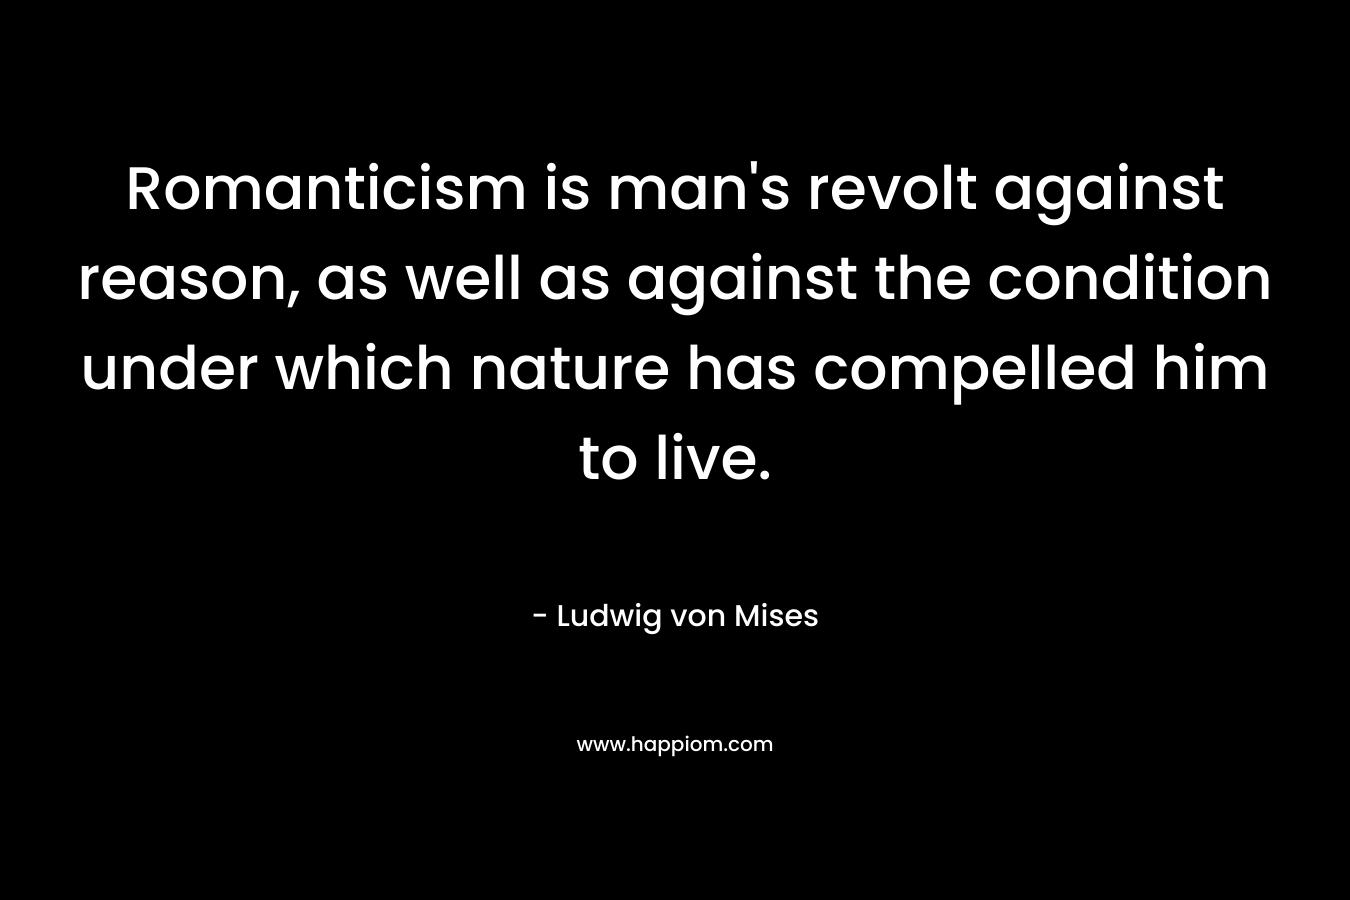 Romanticism is man’s revolt against reason, as well as against the condition under which nature has compelled him to live. – Ludwig von Mises